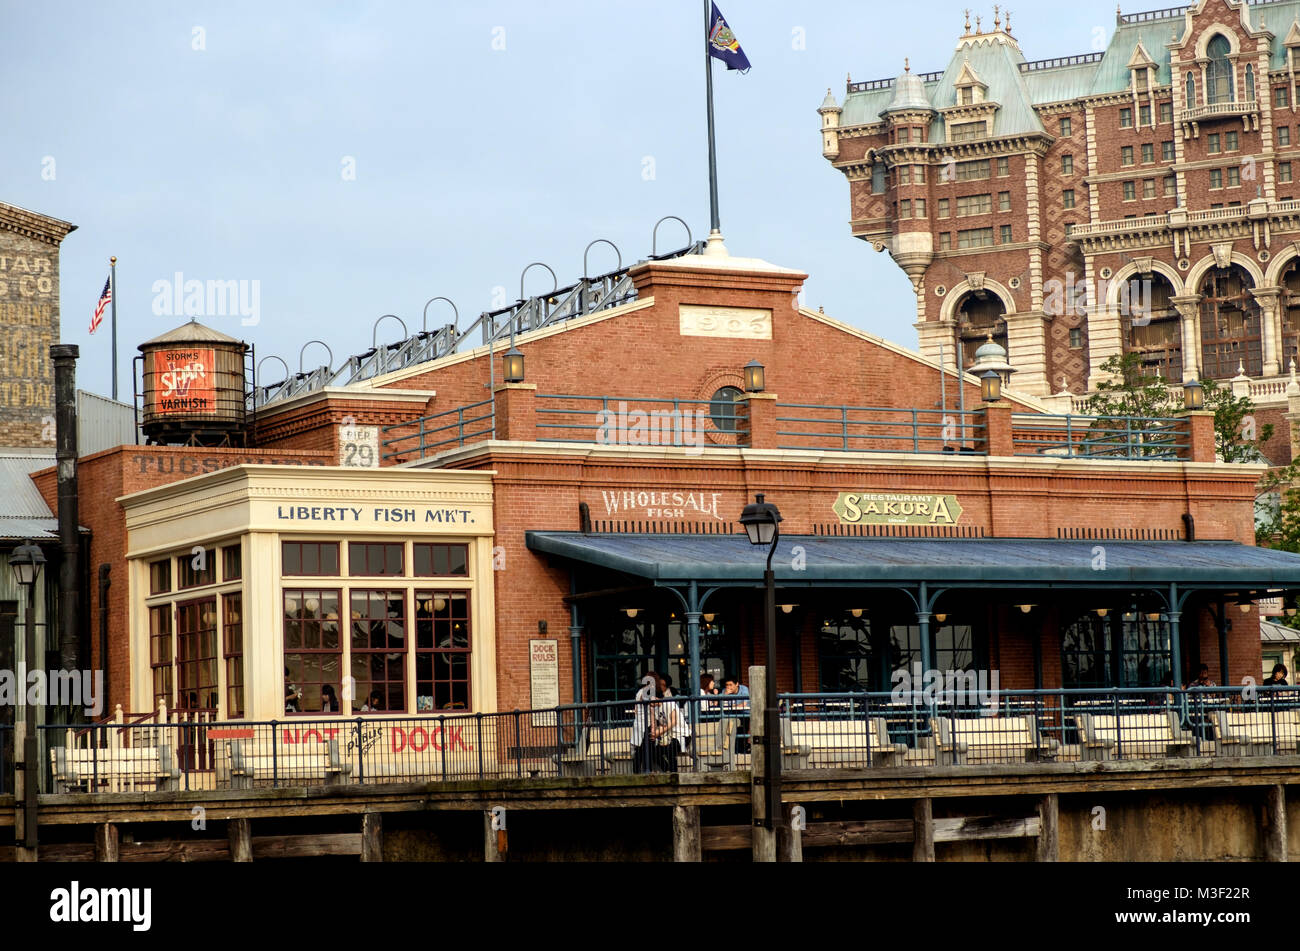 Vintage American building on a pier with large awning and benches in front. Back right is tall building. Old water tower on roof back left. Disneysea. Stock Photo